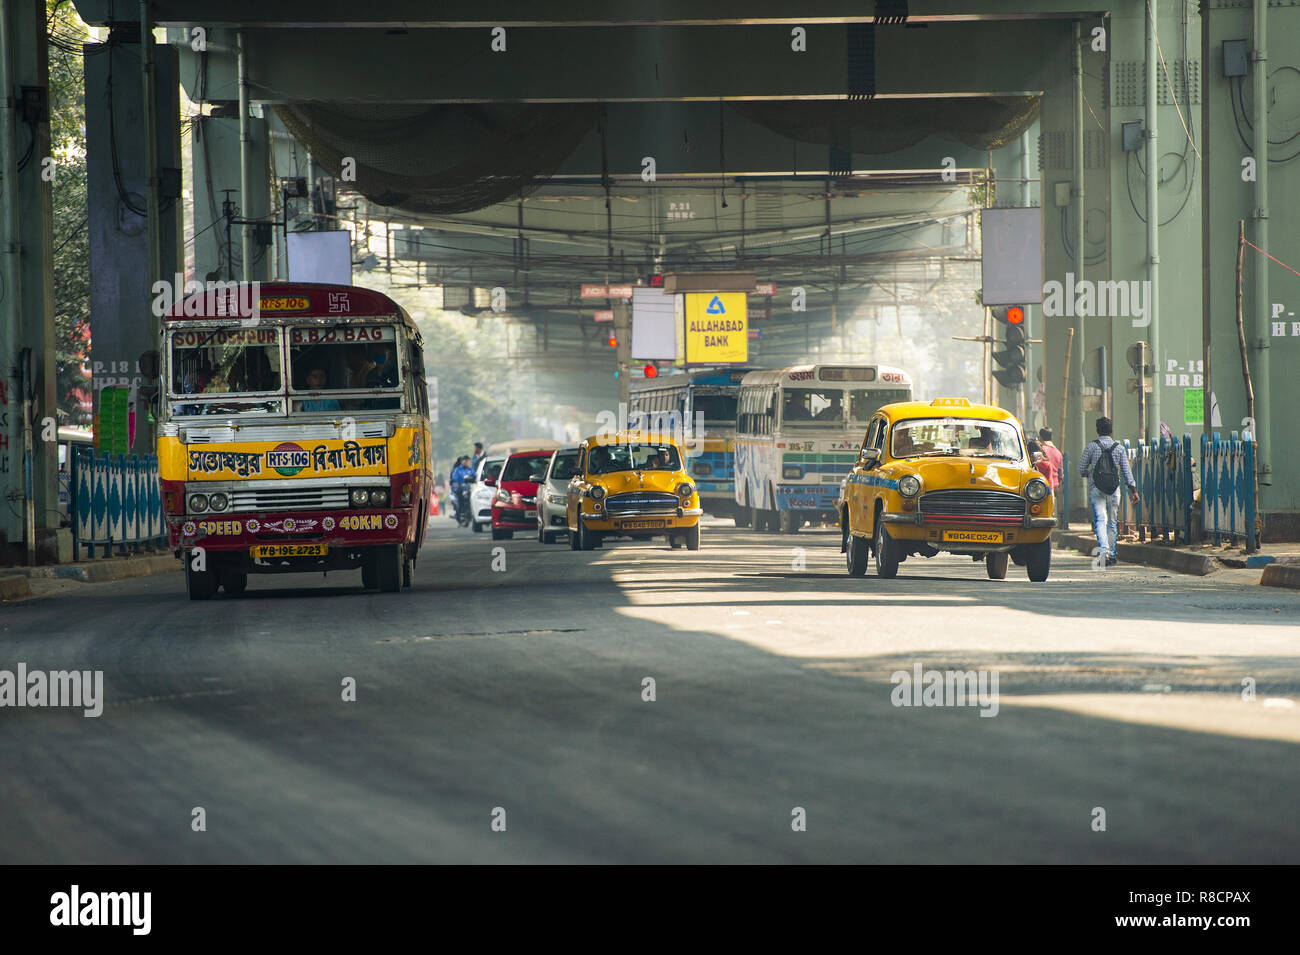 Some Ambassador cab taxi, buses and people through the streets of Kolkata. Stock Photo